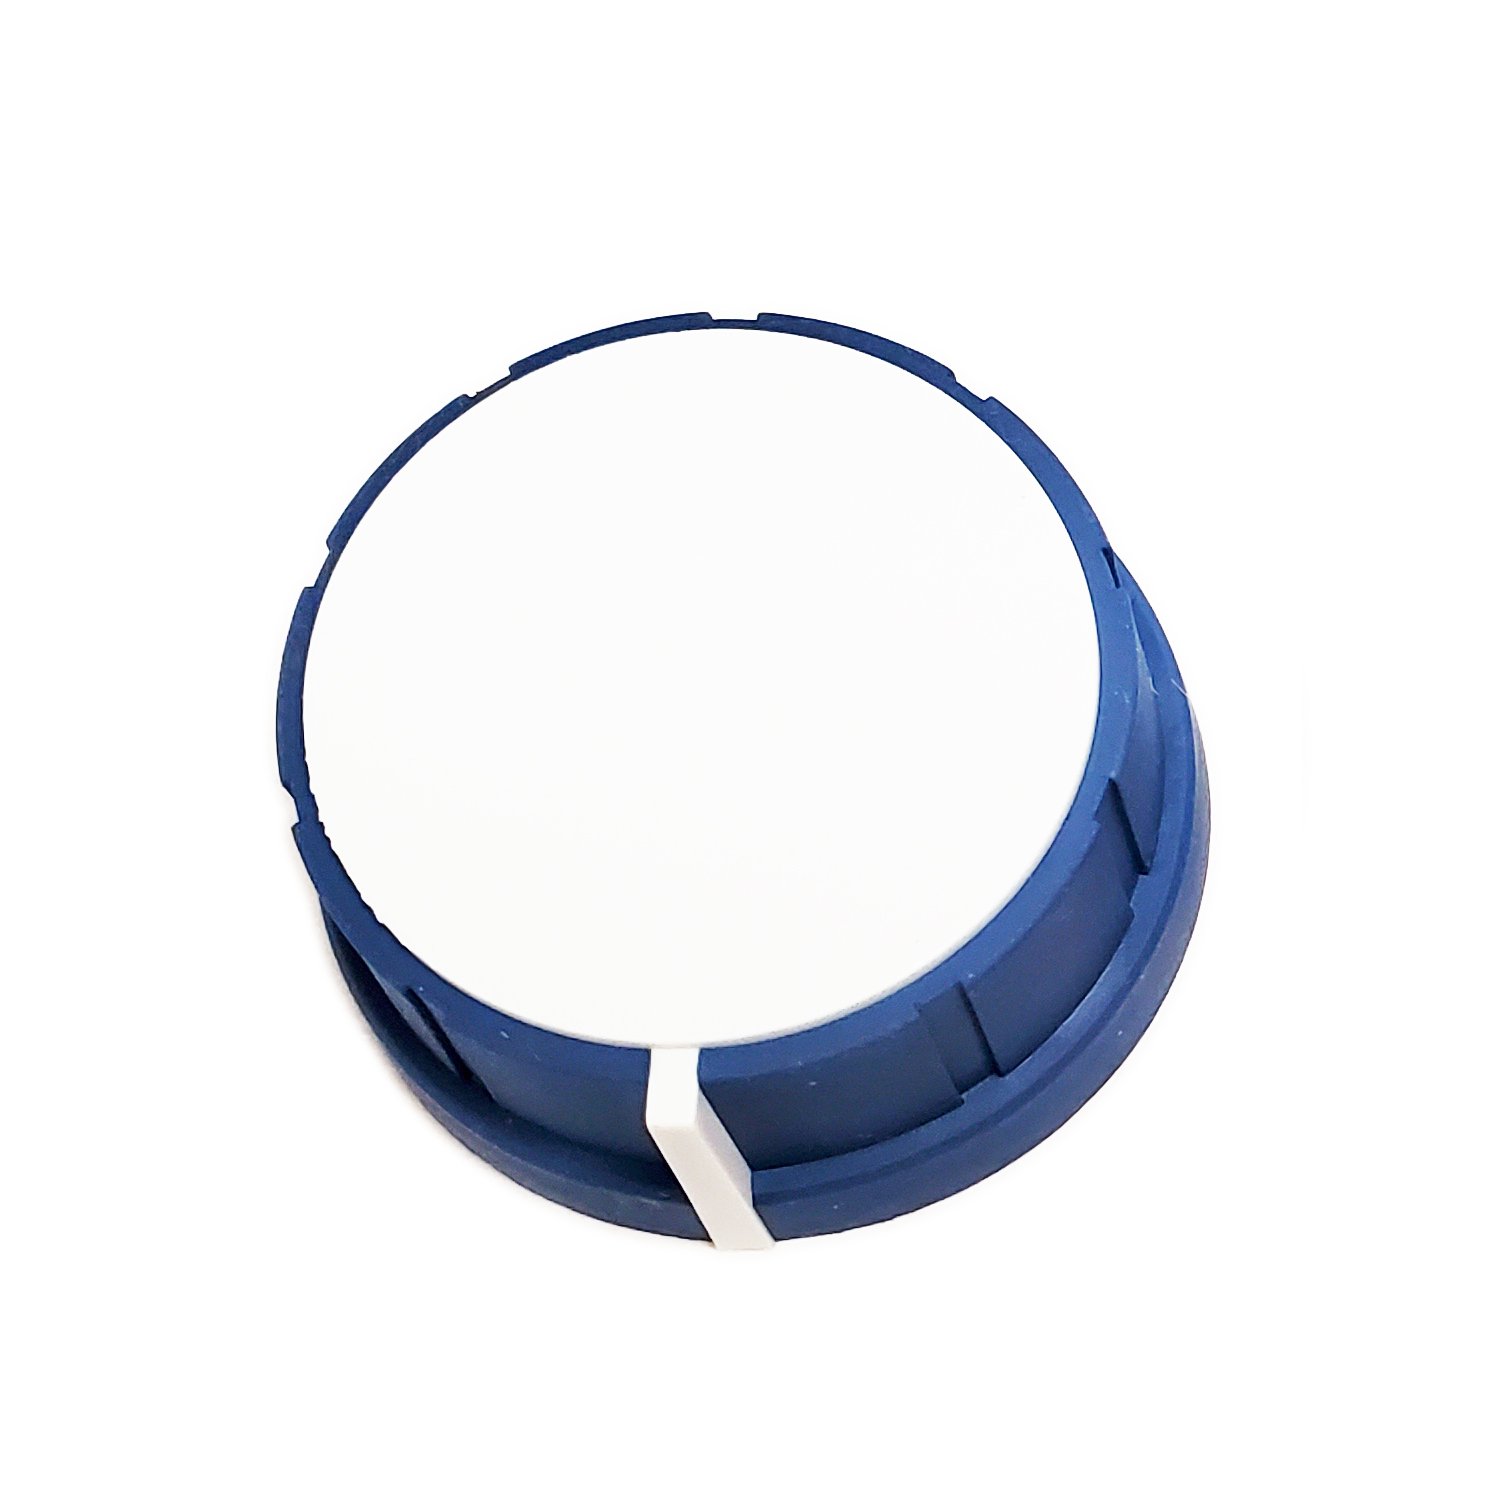 Finlandia / Harvia Part # F40-O Timer Knob for oval shaped shaft (notes: for Blue & White)